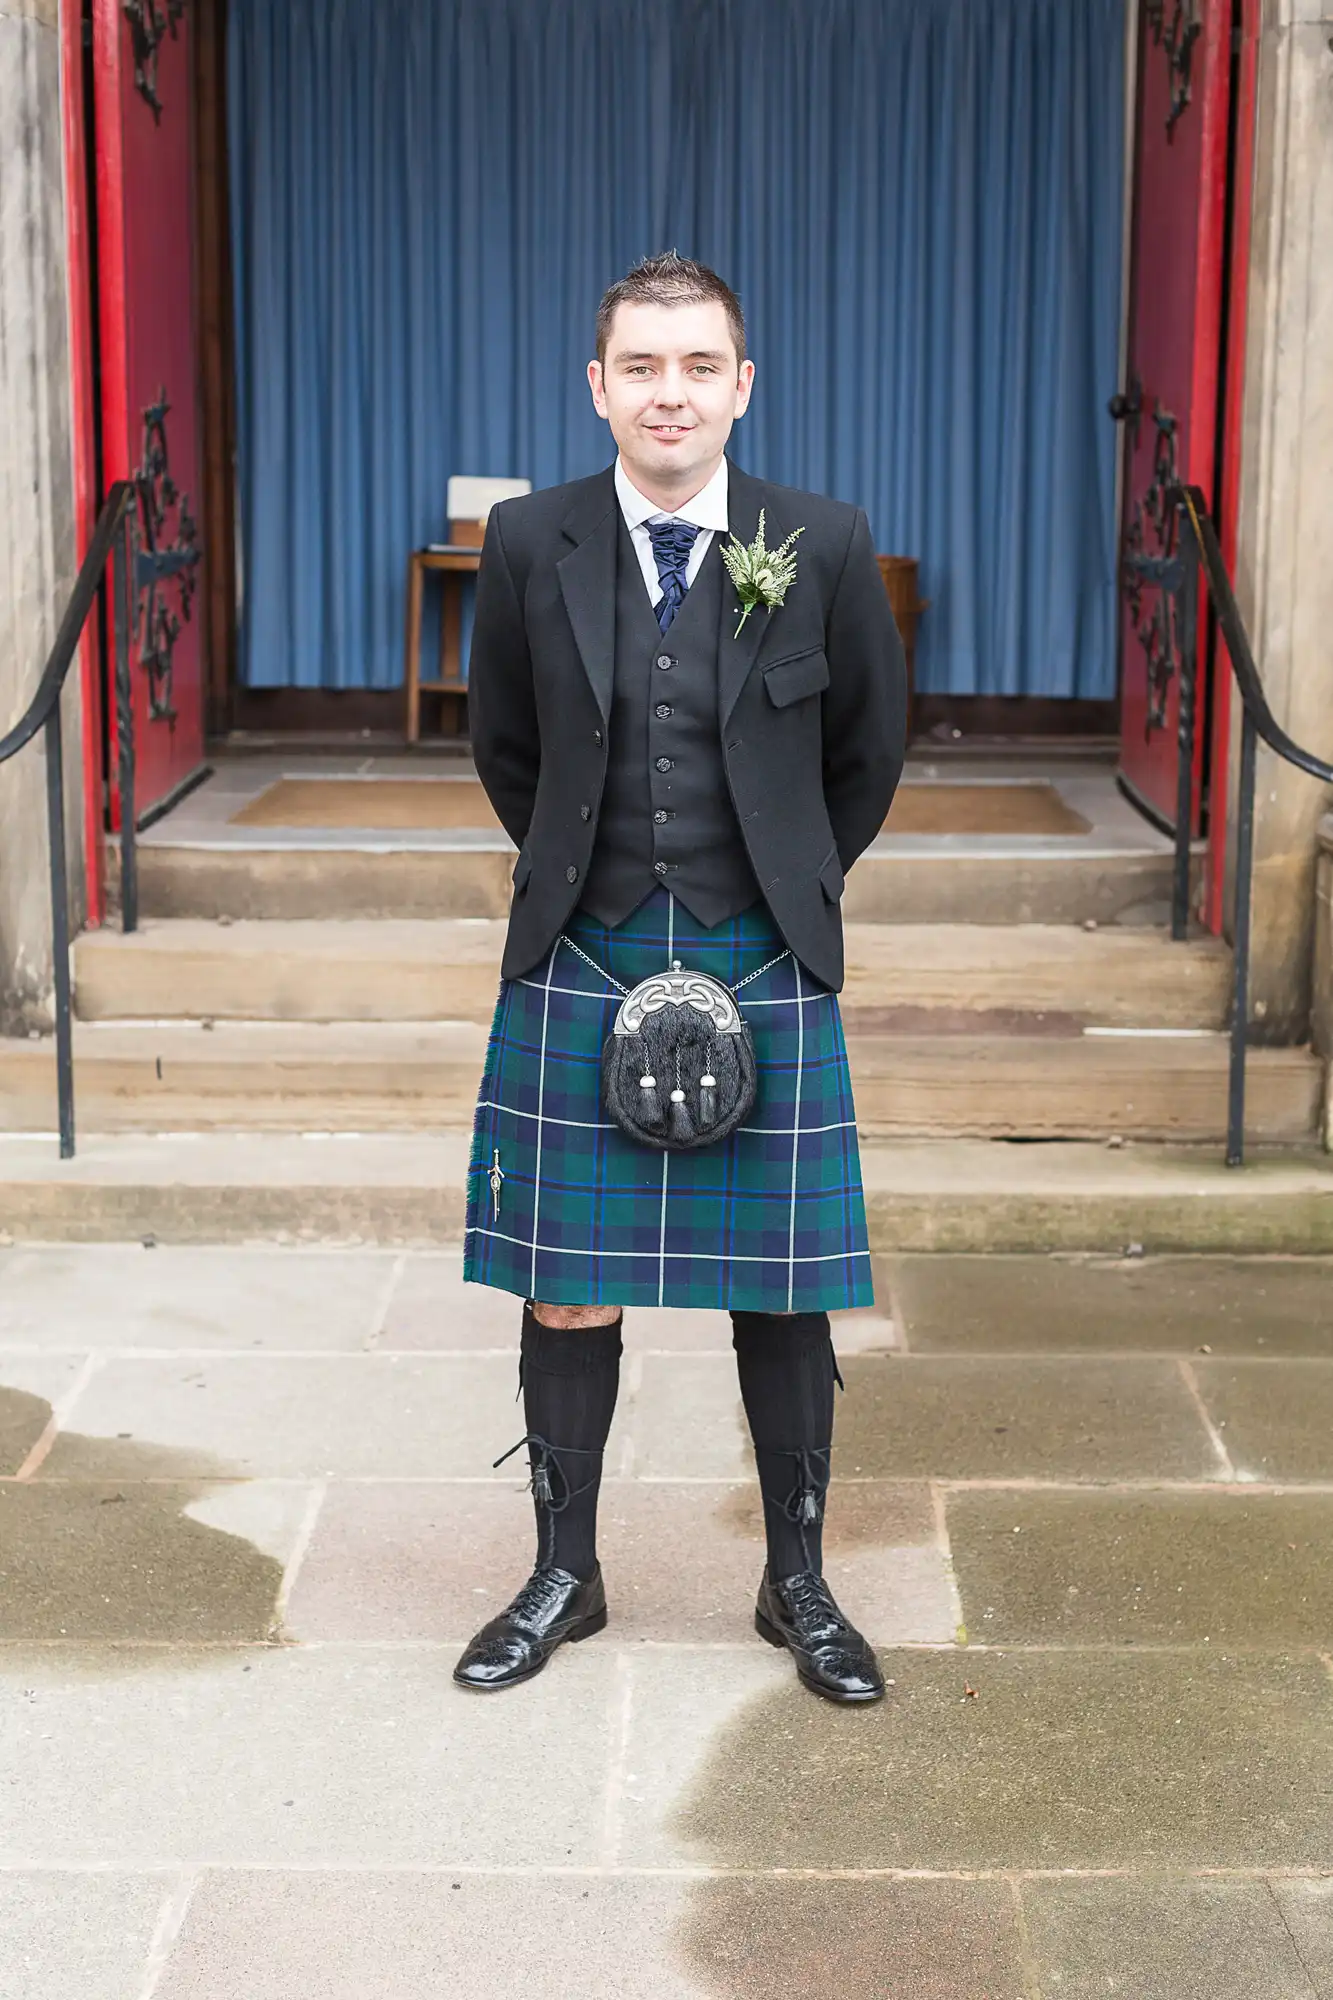 Man in traditional scottish kilt and jacket standing confidently in front of a church entrance with blue doors.